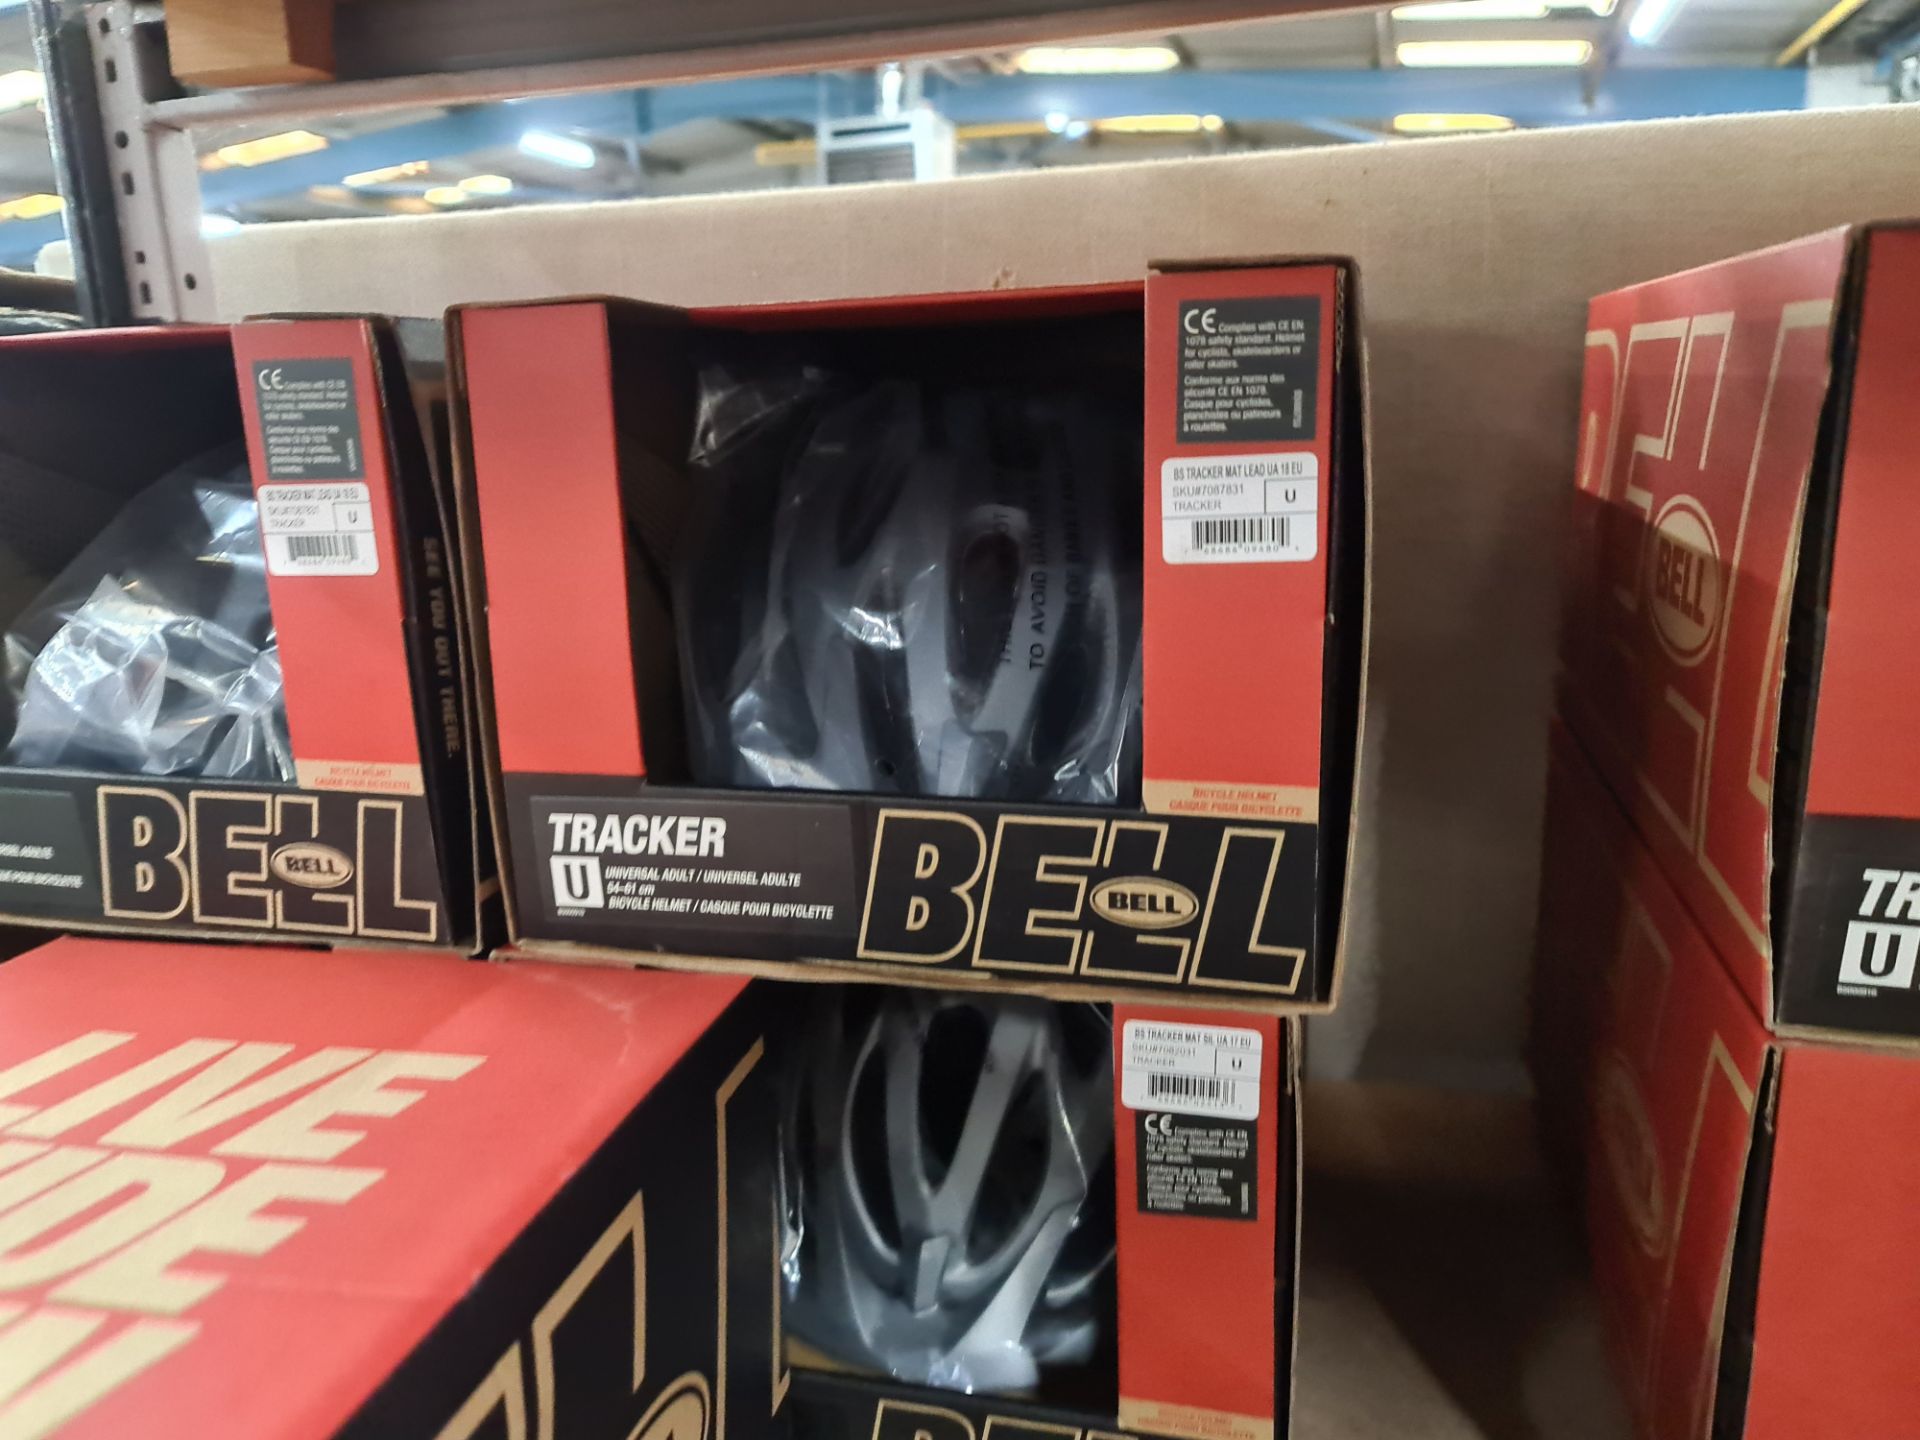 5 off Bell tracker bicycle helmets, all sized U (universal adult), all individually boxed - Image 4 of 4